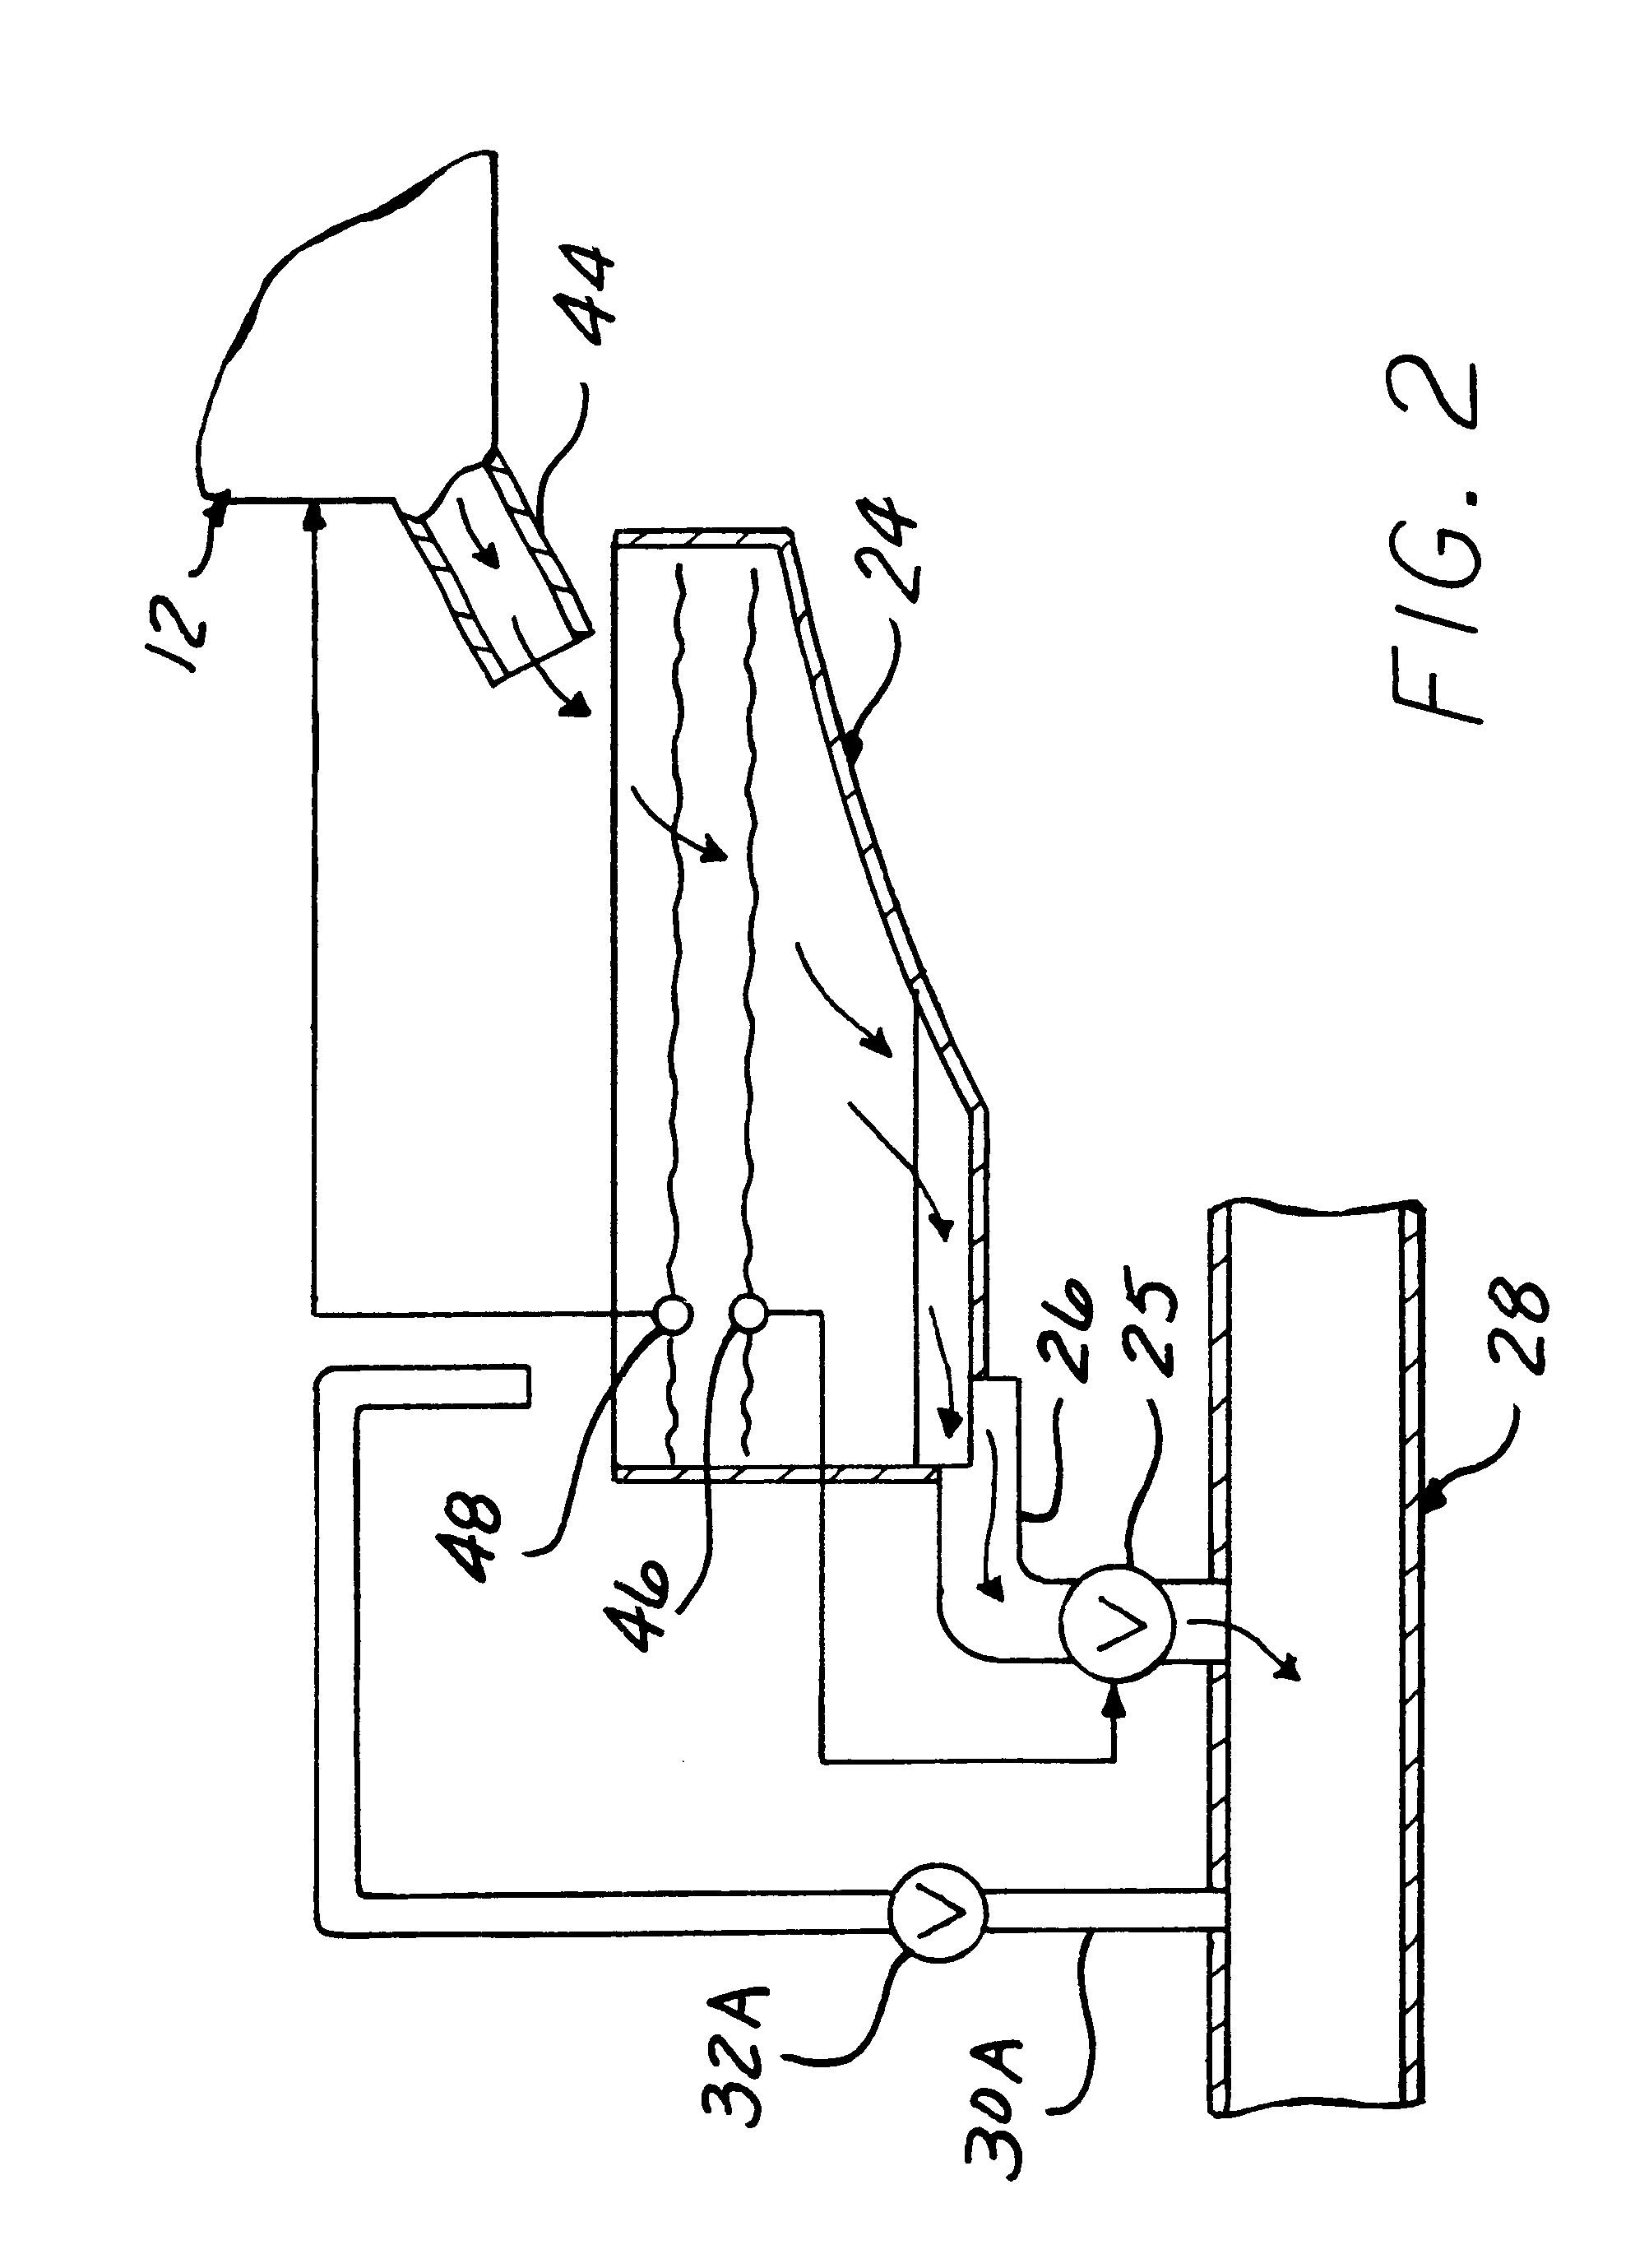 Vacuum flush assist system and process for handling machining cutting fluid